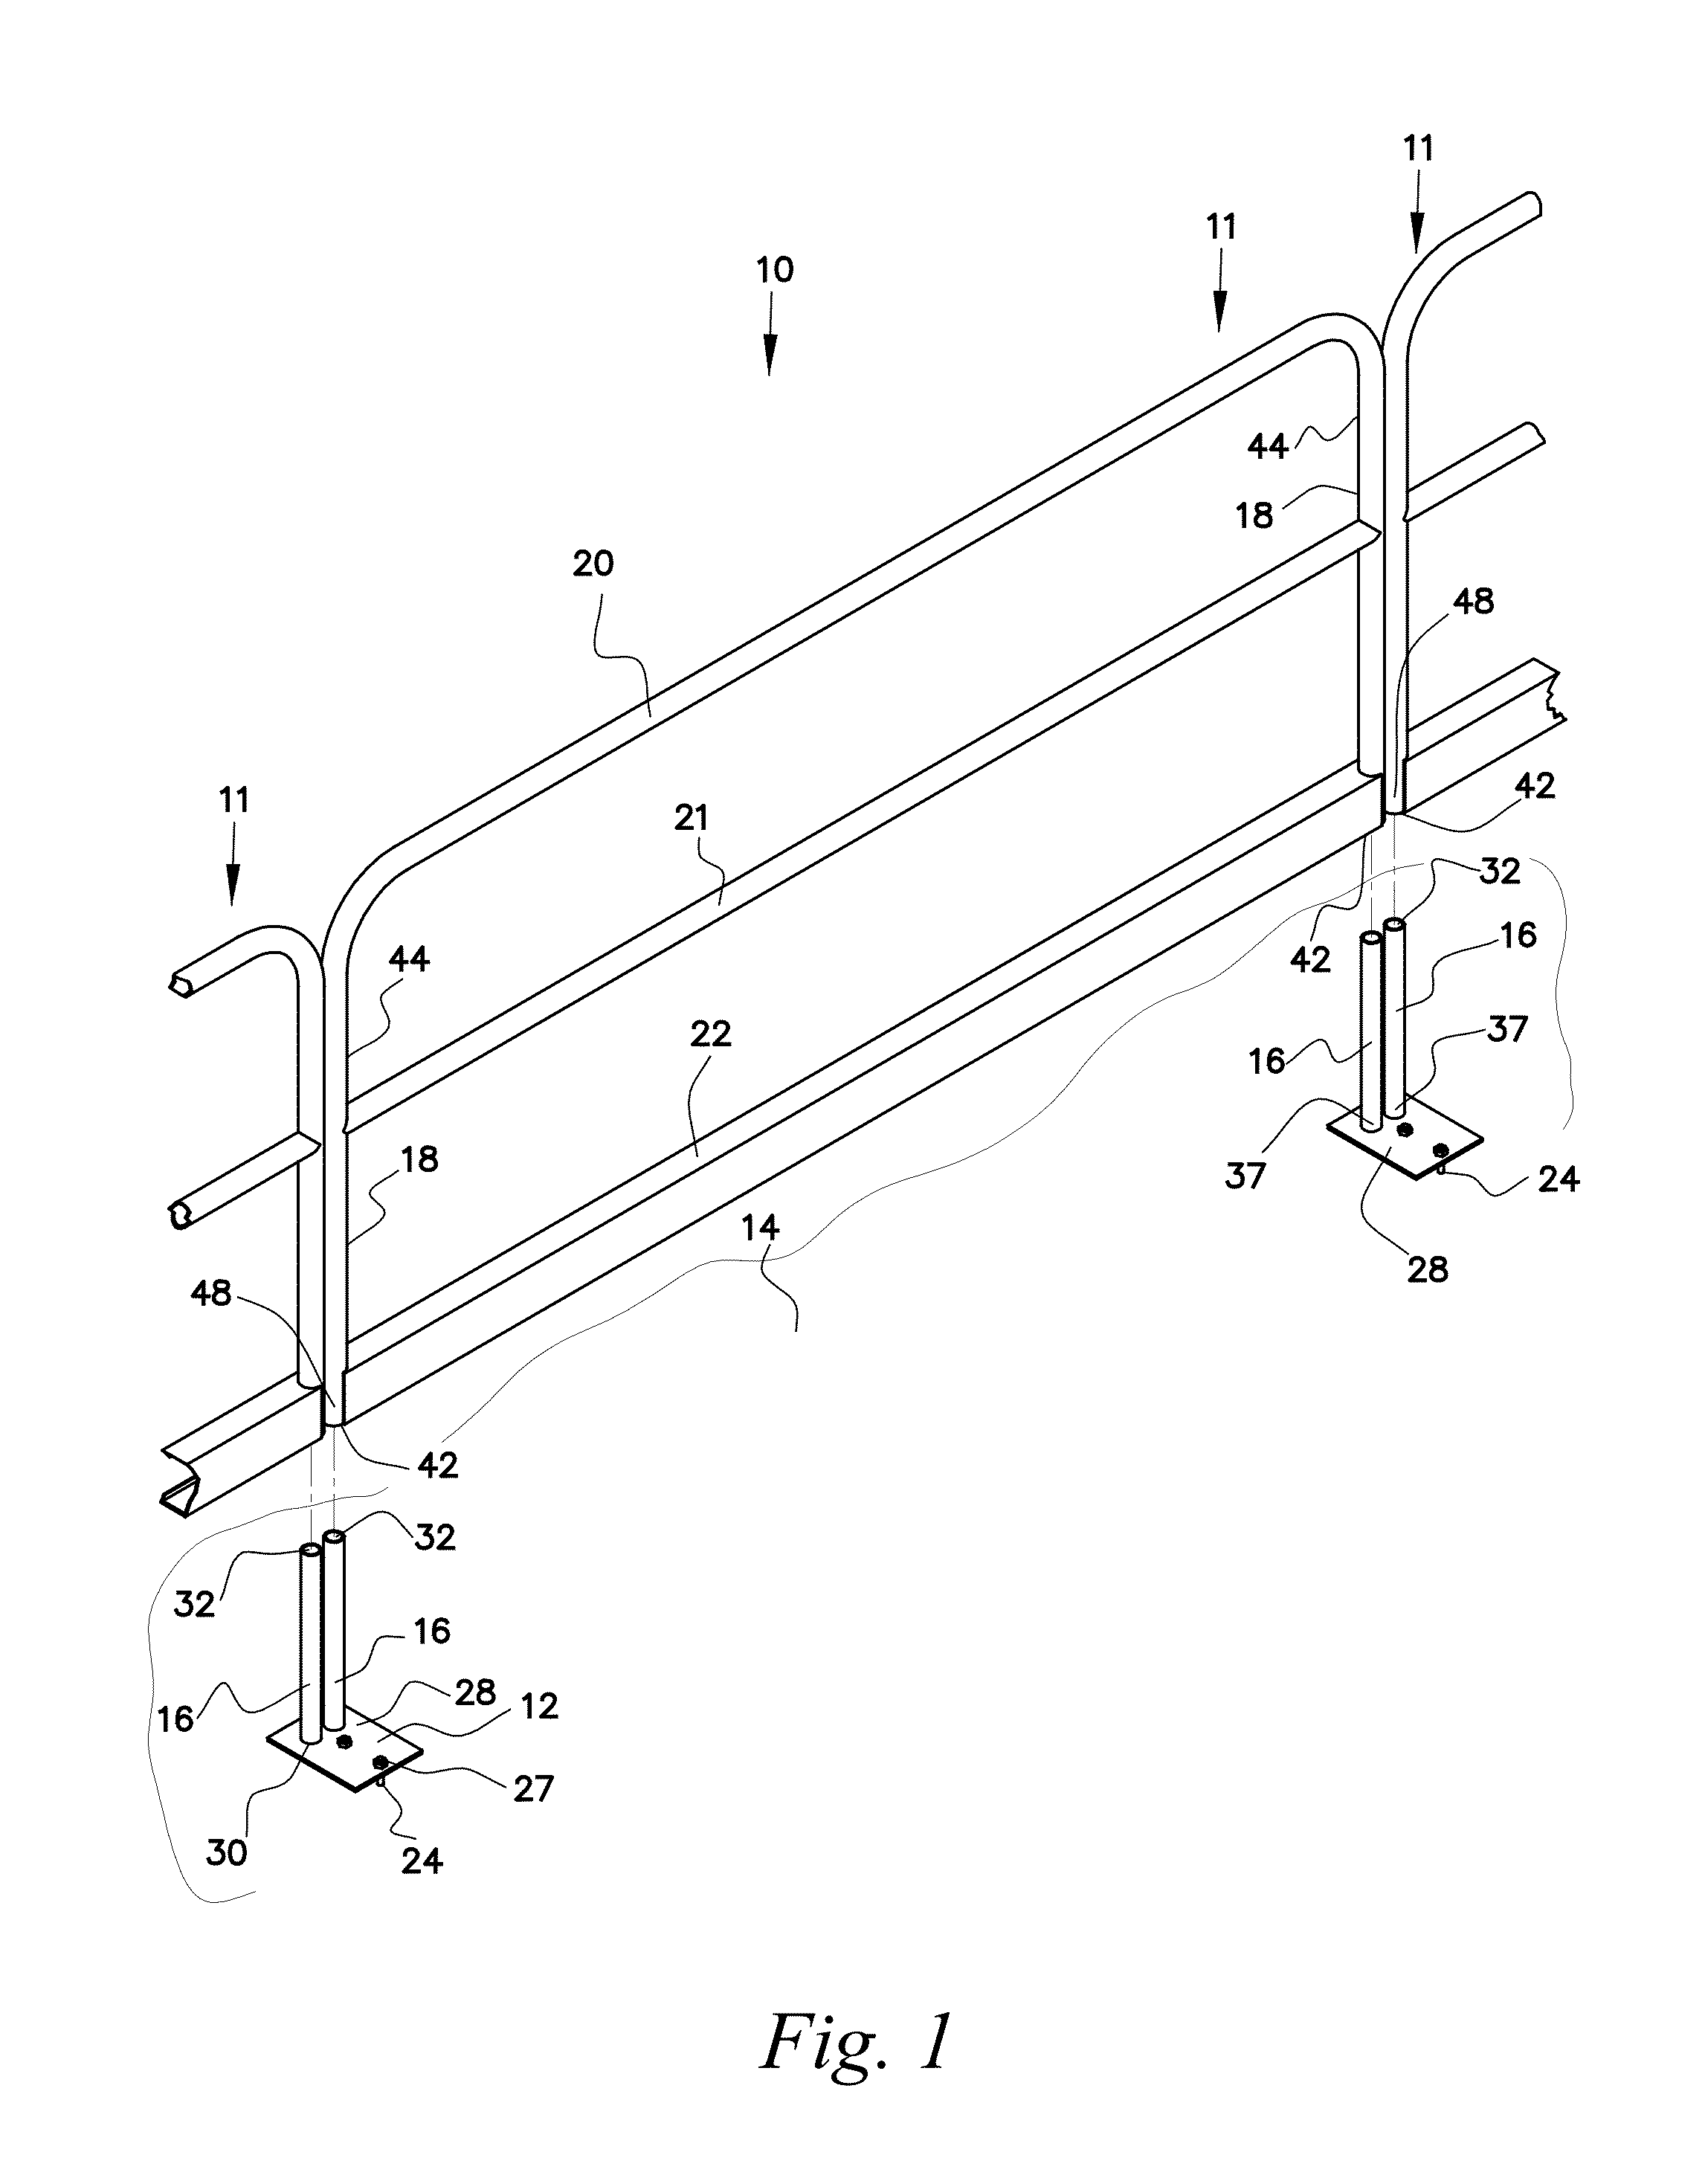 Metal safety rail for open floors of a building under construction